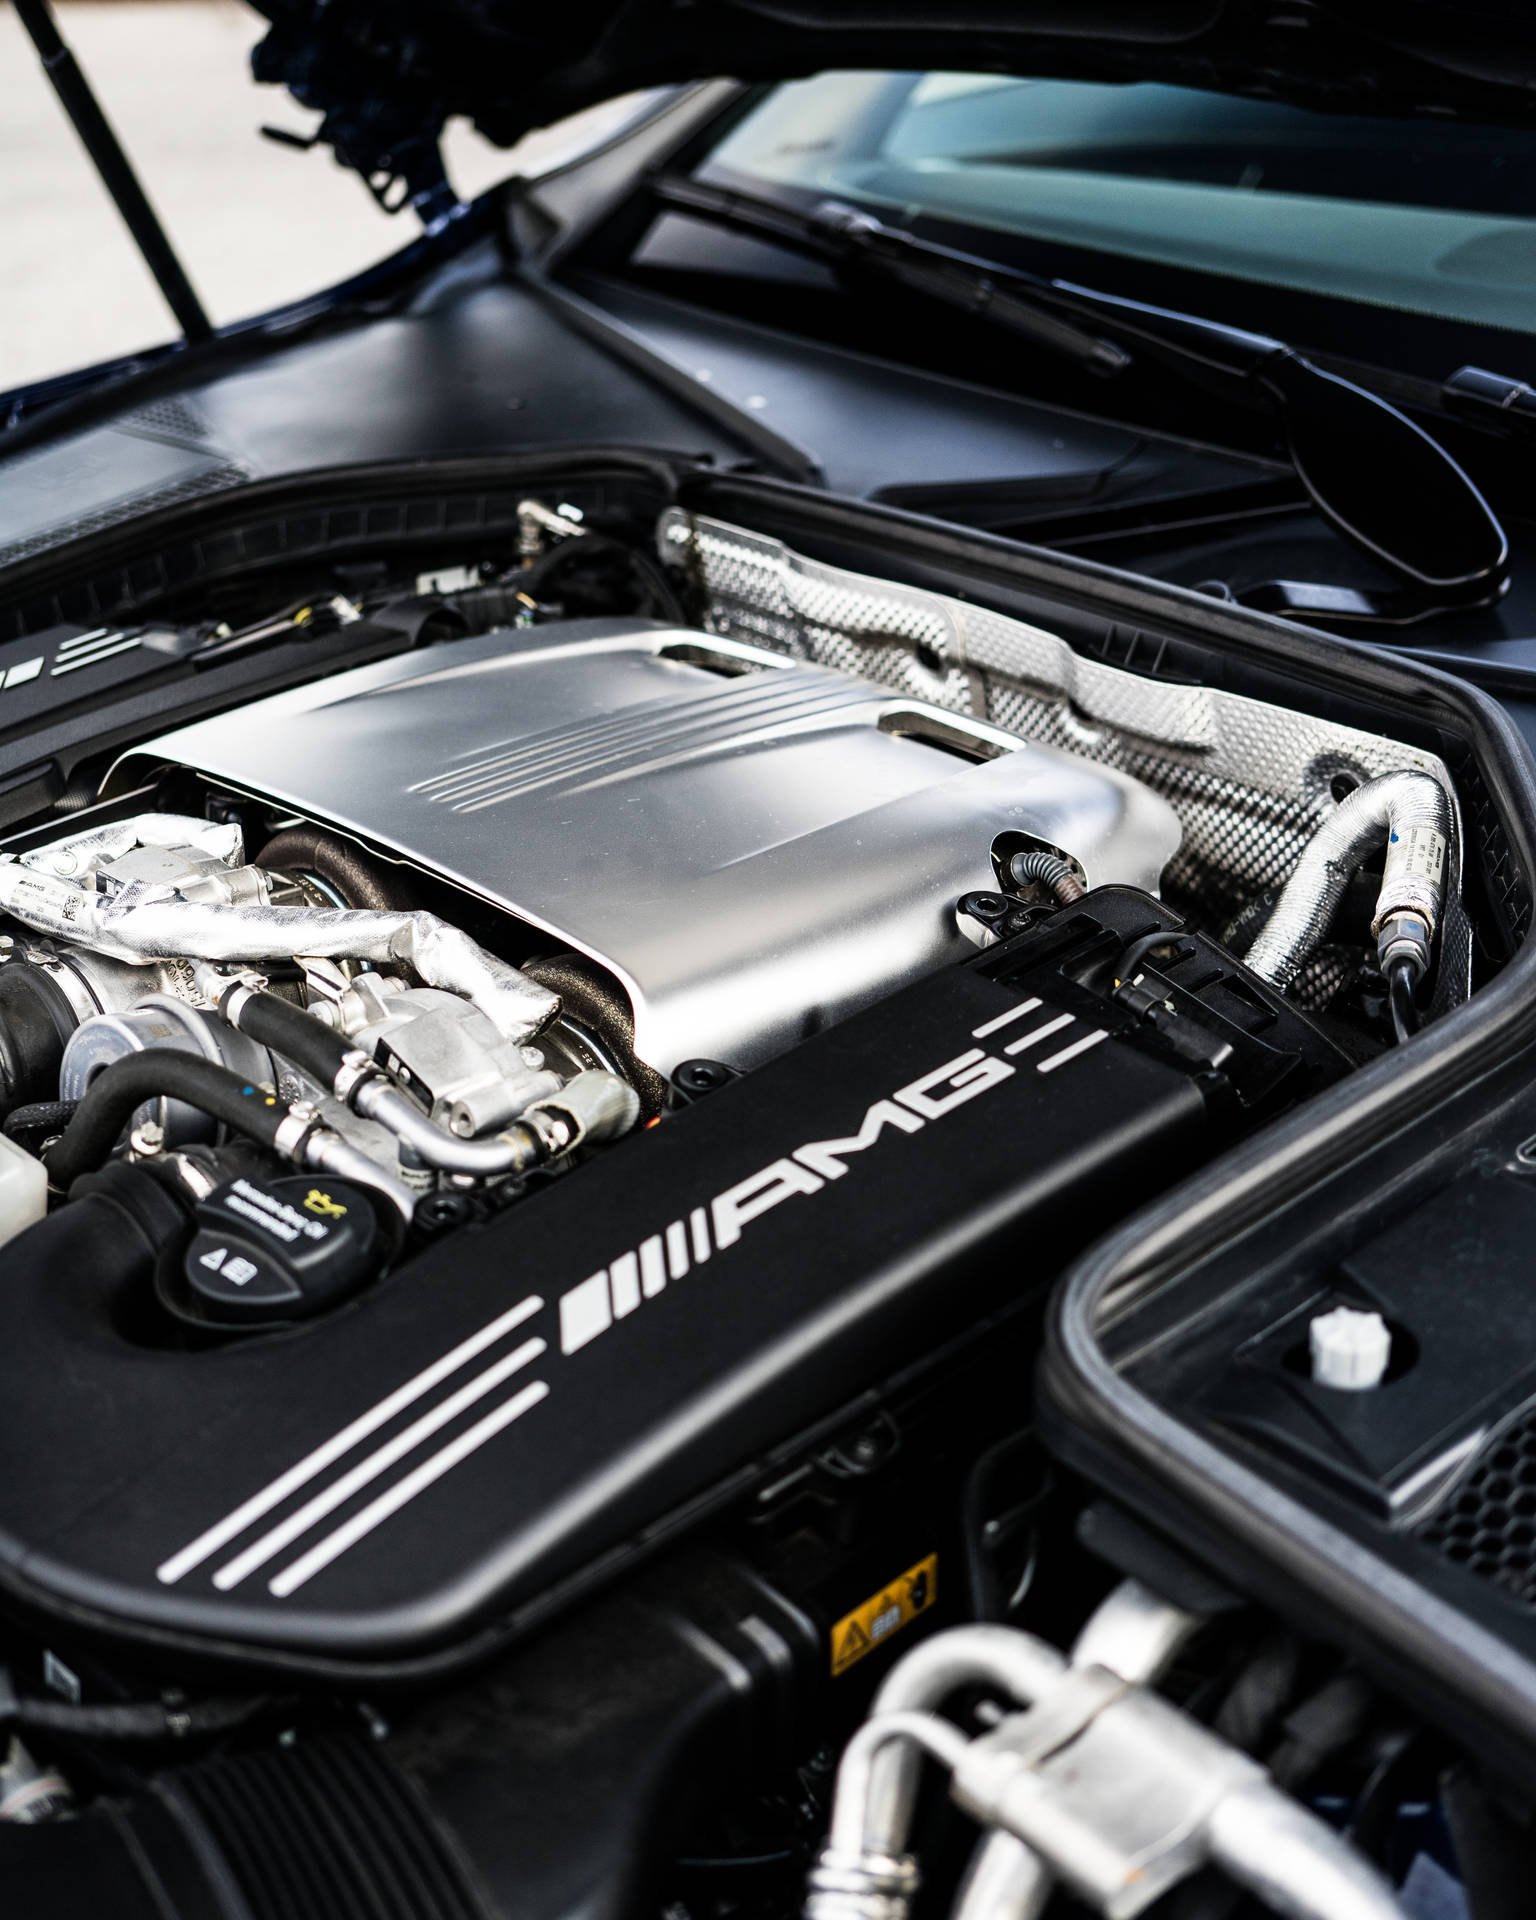 Free Engine Wallpaper Downloads, [100+] Engine Wallpapers for FREE |  